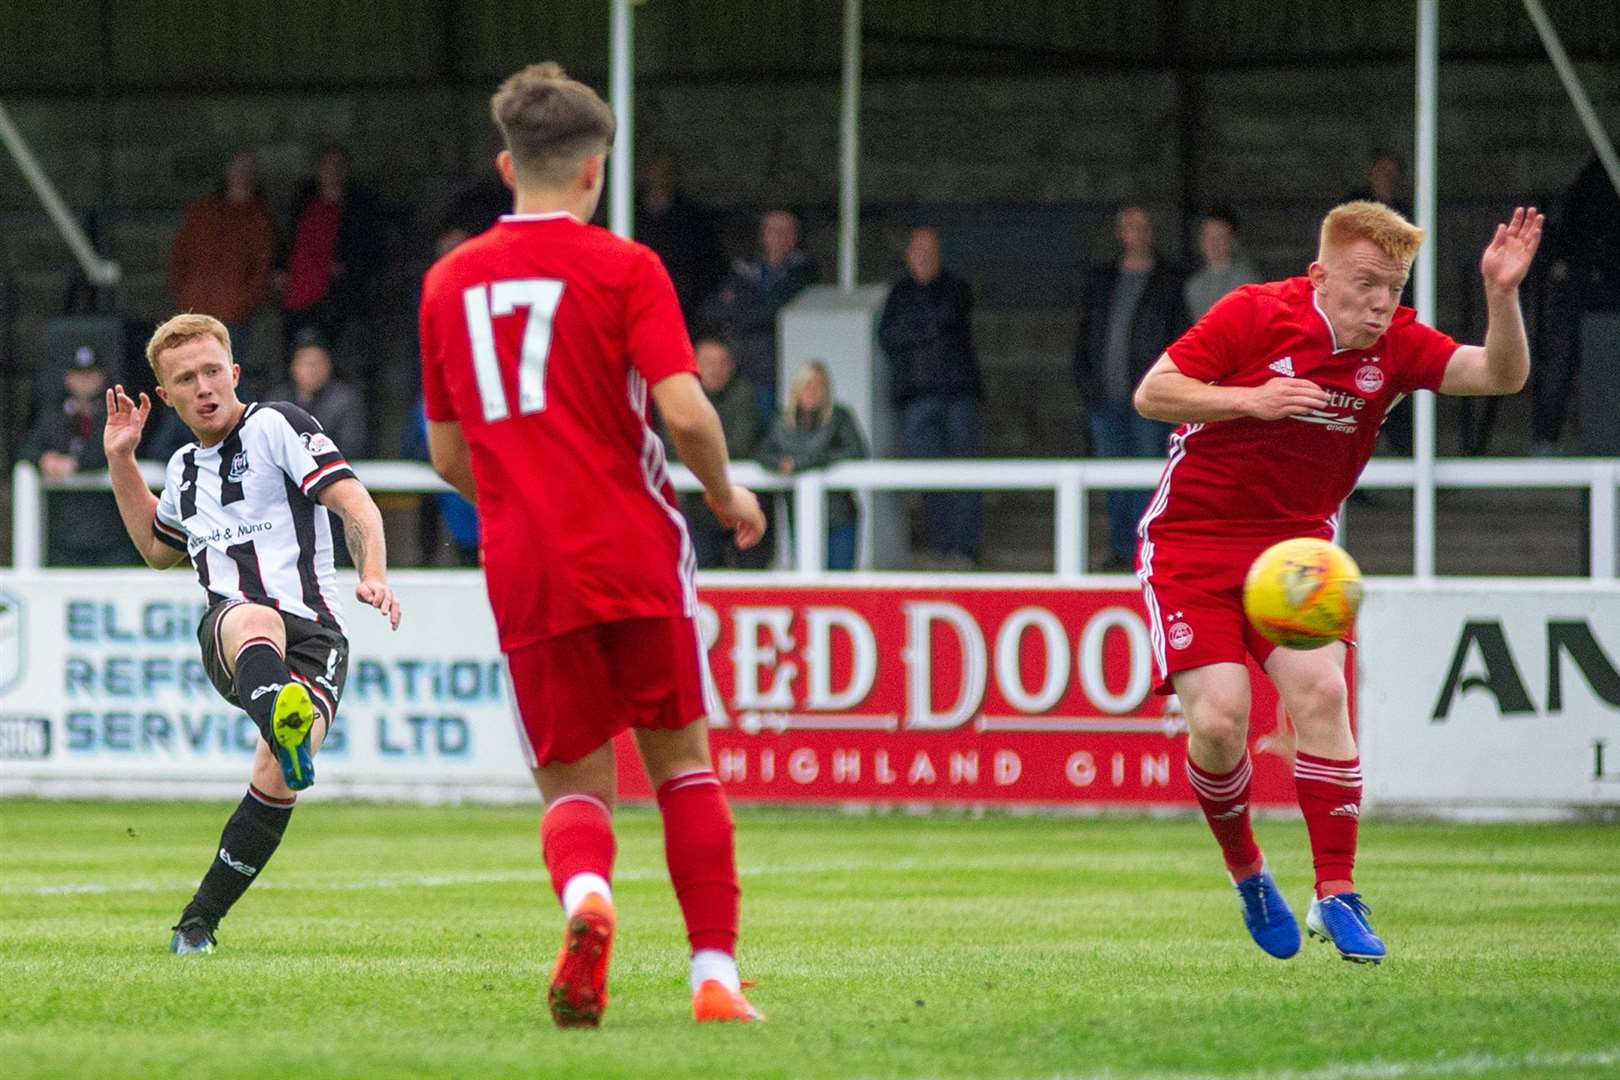 Elgin new boy Conor O'Keefe scores the second of a quickfire hat-trick. Photo: Daniel Forsyth